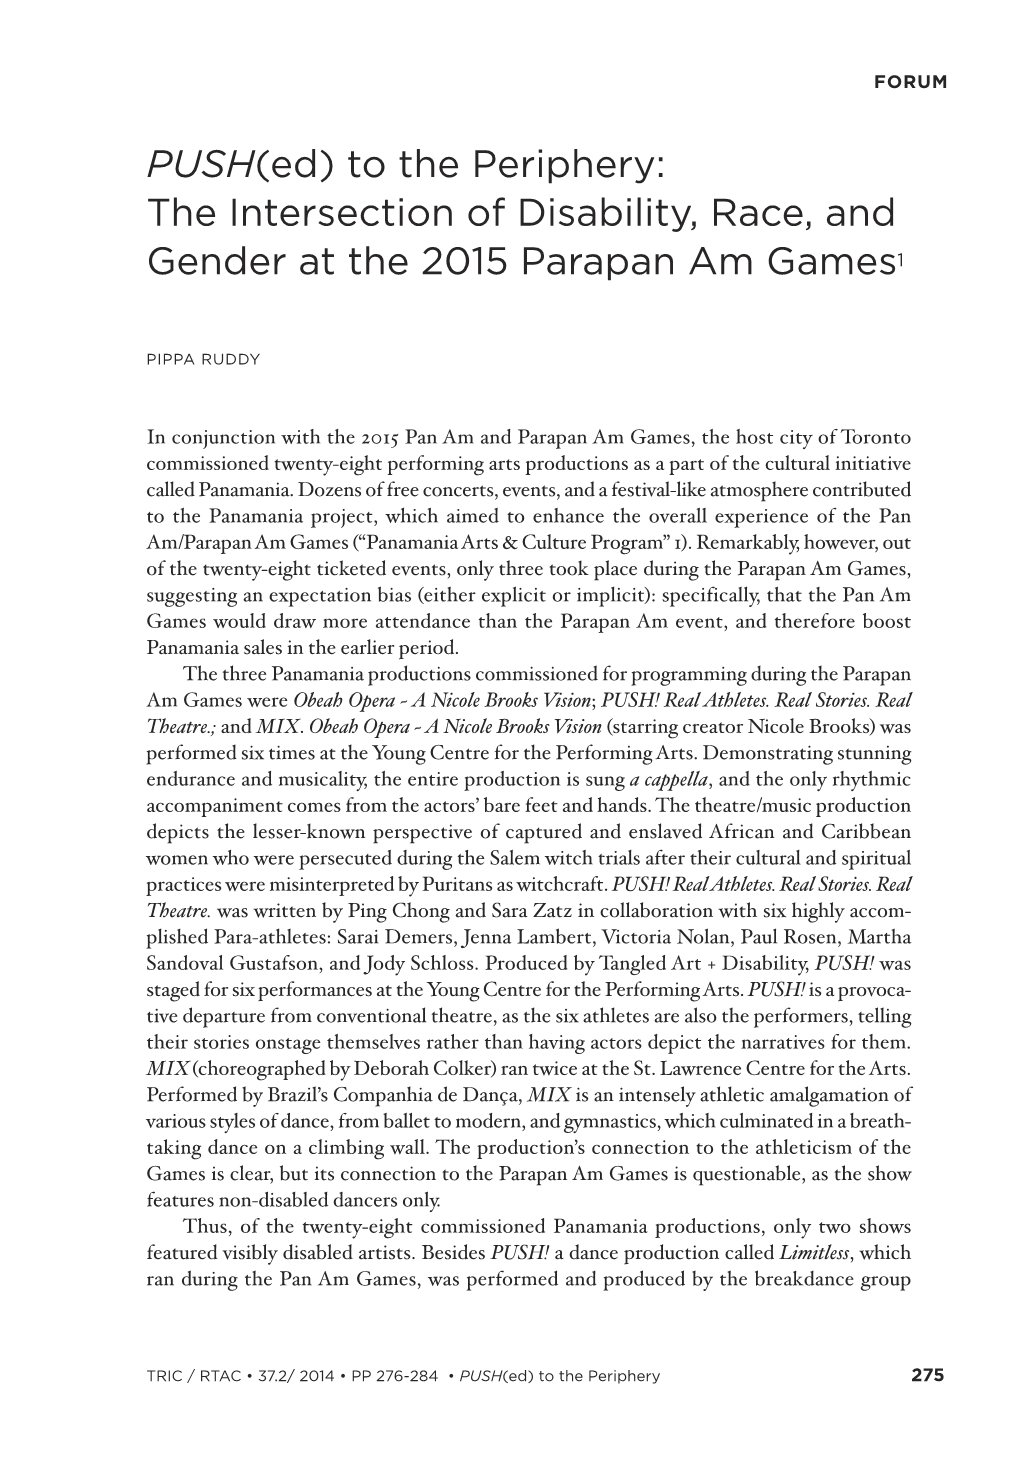 The Intersection of Disability, Race, and Gender at the 2015 Parapan Am Games 1